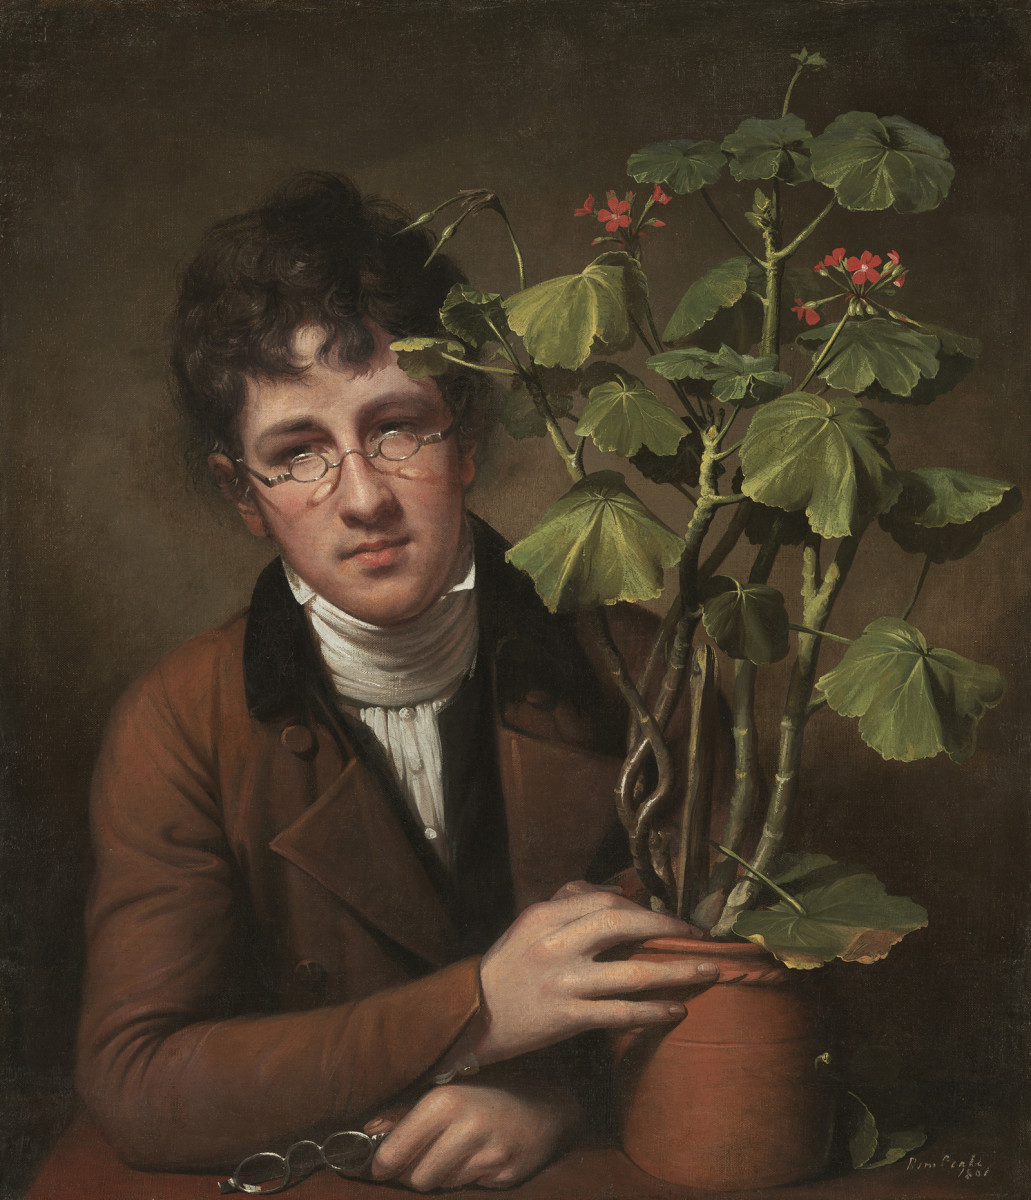 Rembrandt Peale (American, 1778 - 1860 ), Rubens Peale with a Geranium, 1801, oil on canvas, Patrons' Permanent Fund